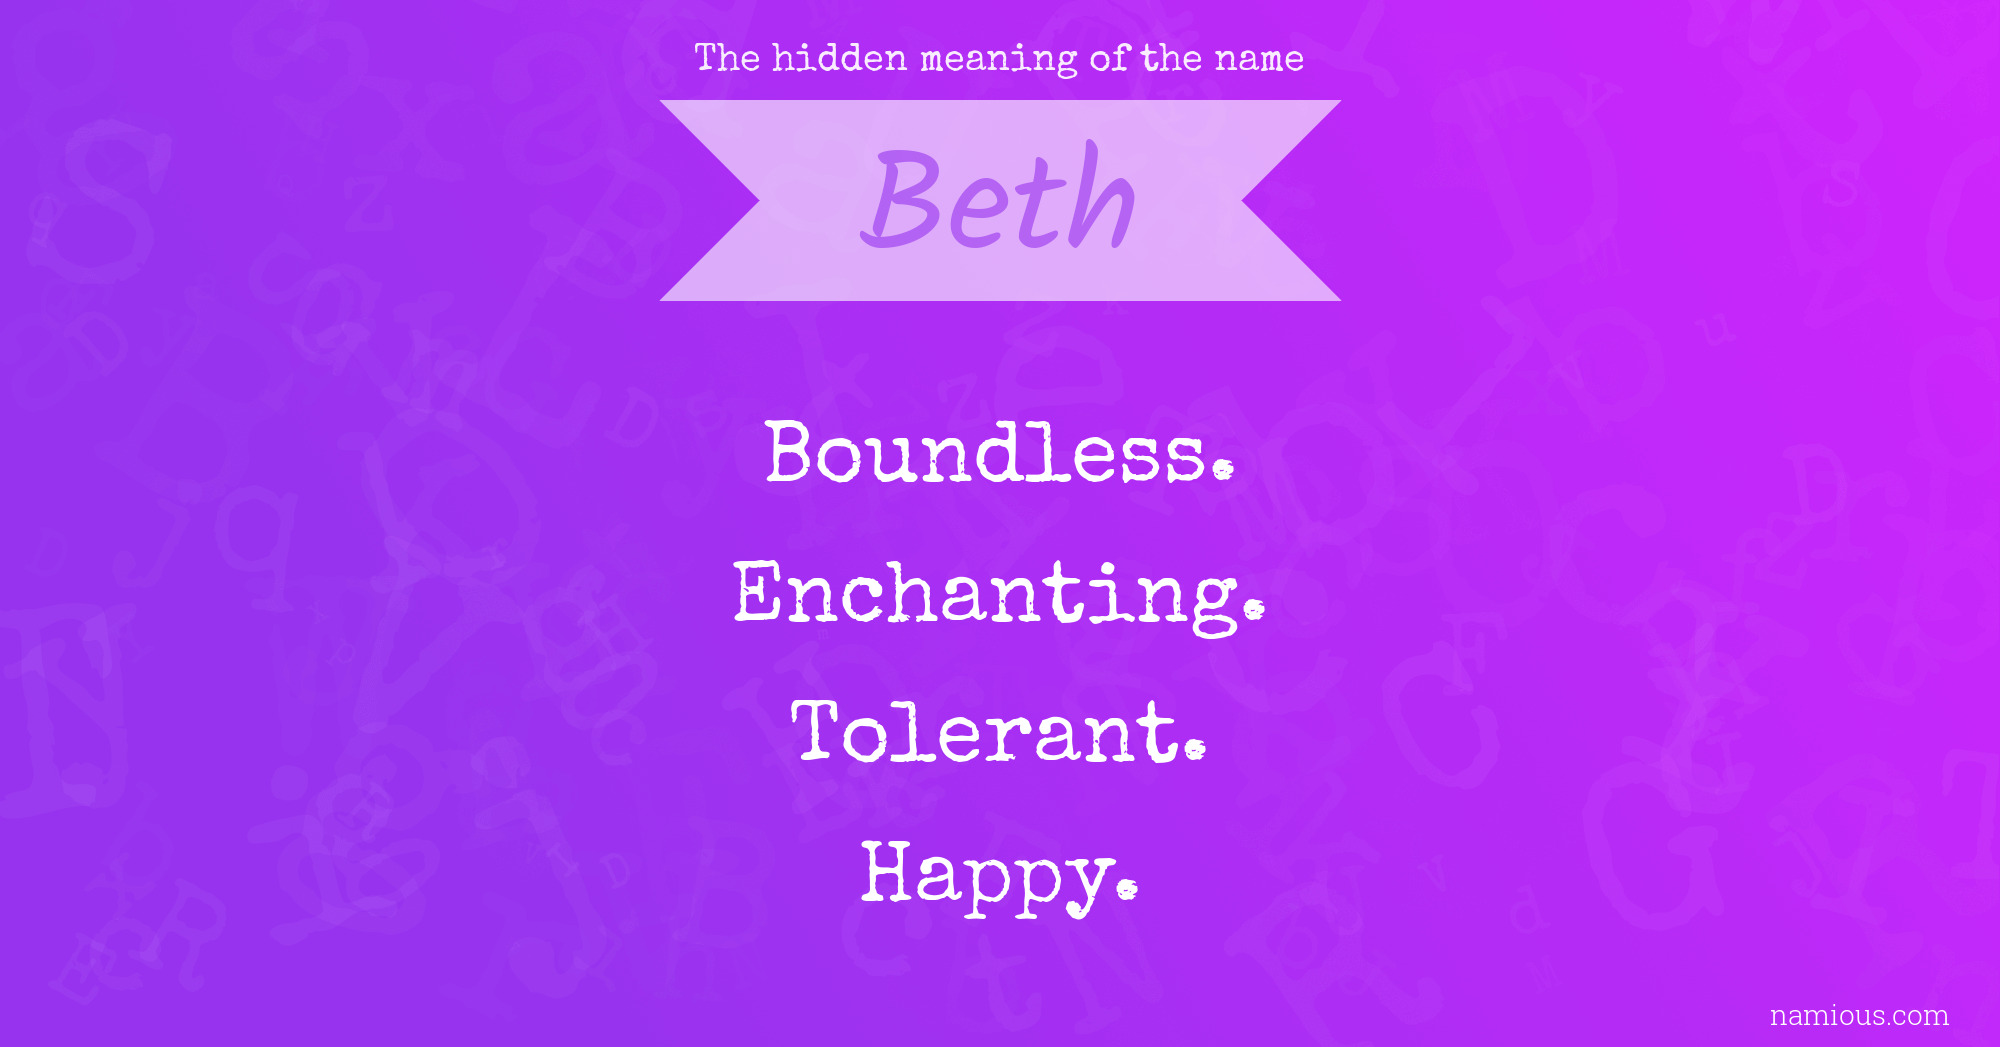 The hidden meaning of the name Beth